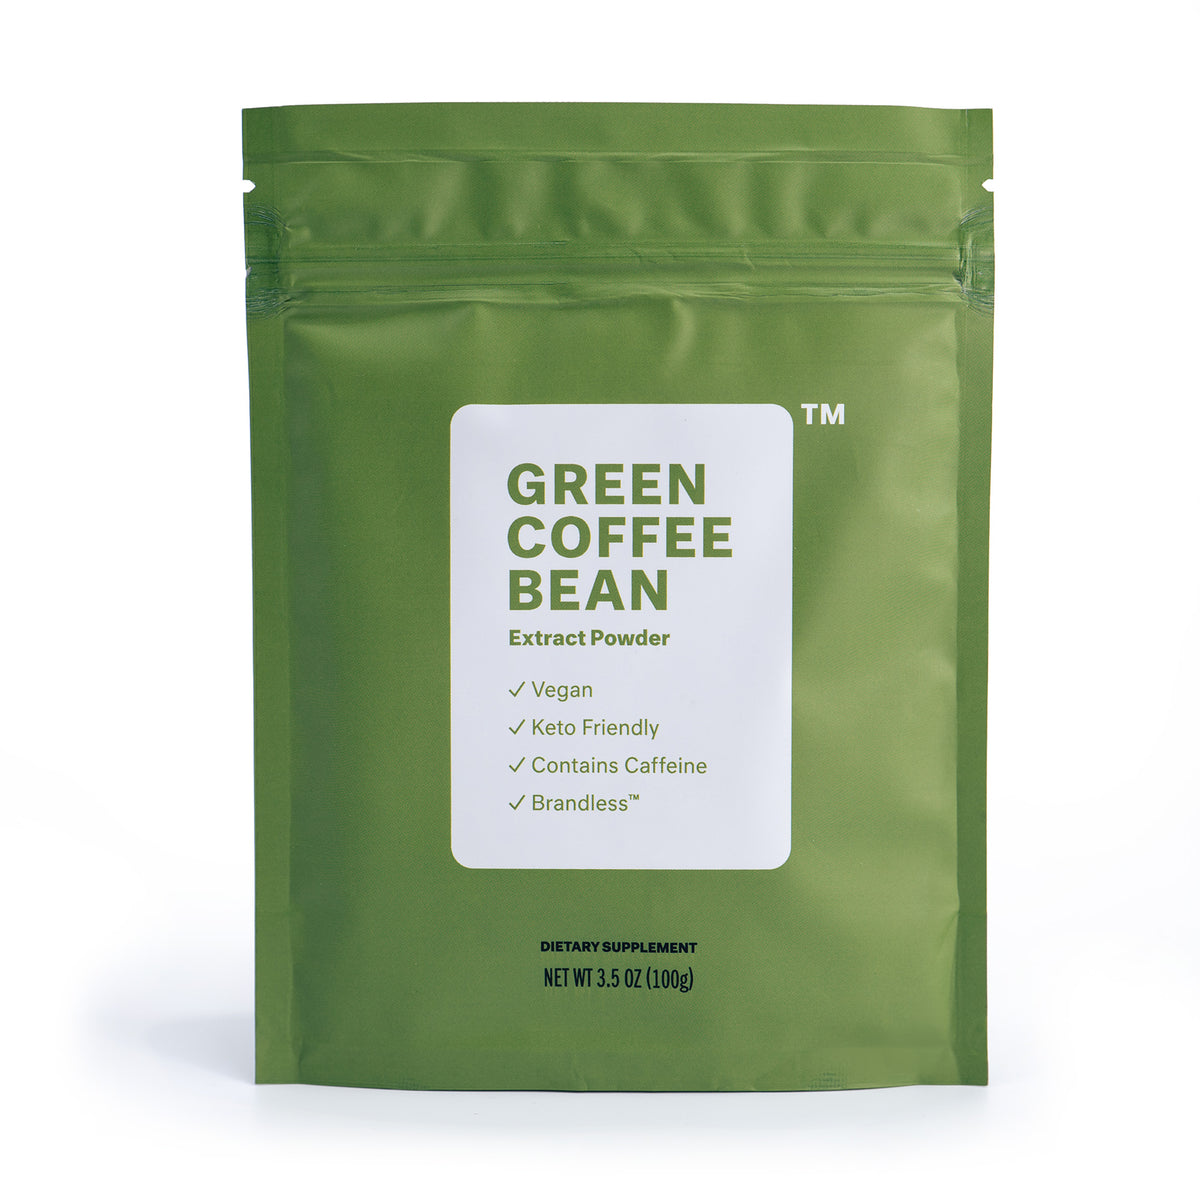 Green Coffee Bean Extract Powder, product photo of bag. Vegan, keto friendly, contains caffeine, brandless. Dietary supplement, net. wt. 3.5oz (100g).